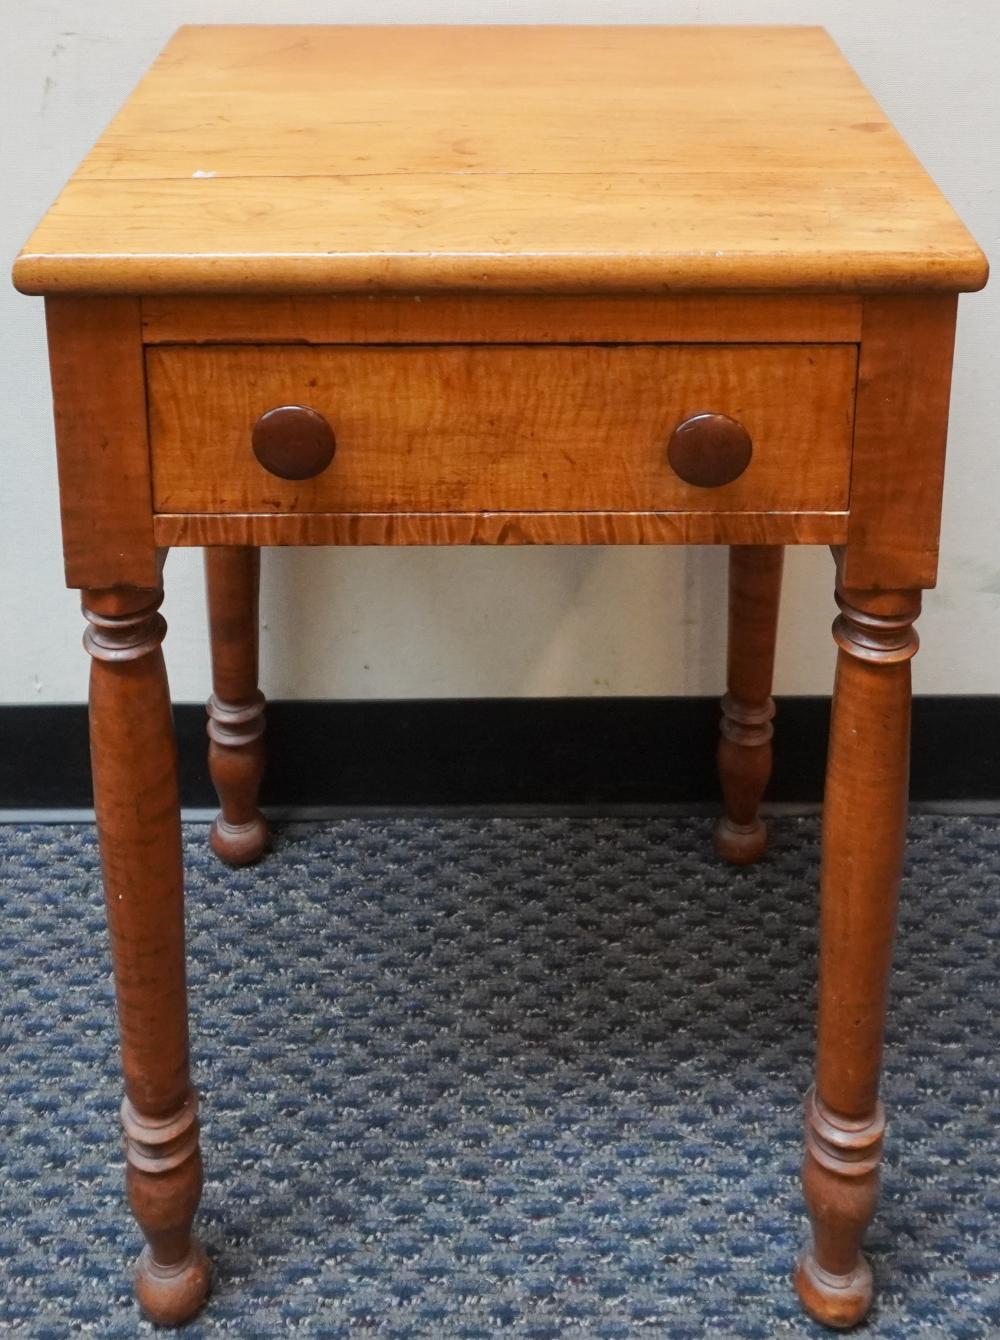 EARLY AMERICAN STYLE MAPLE WORK 2e753d